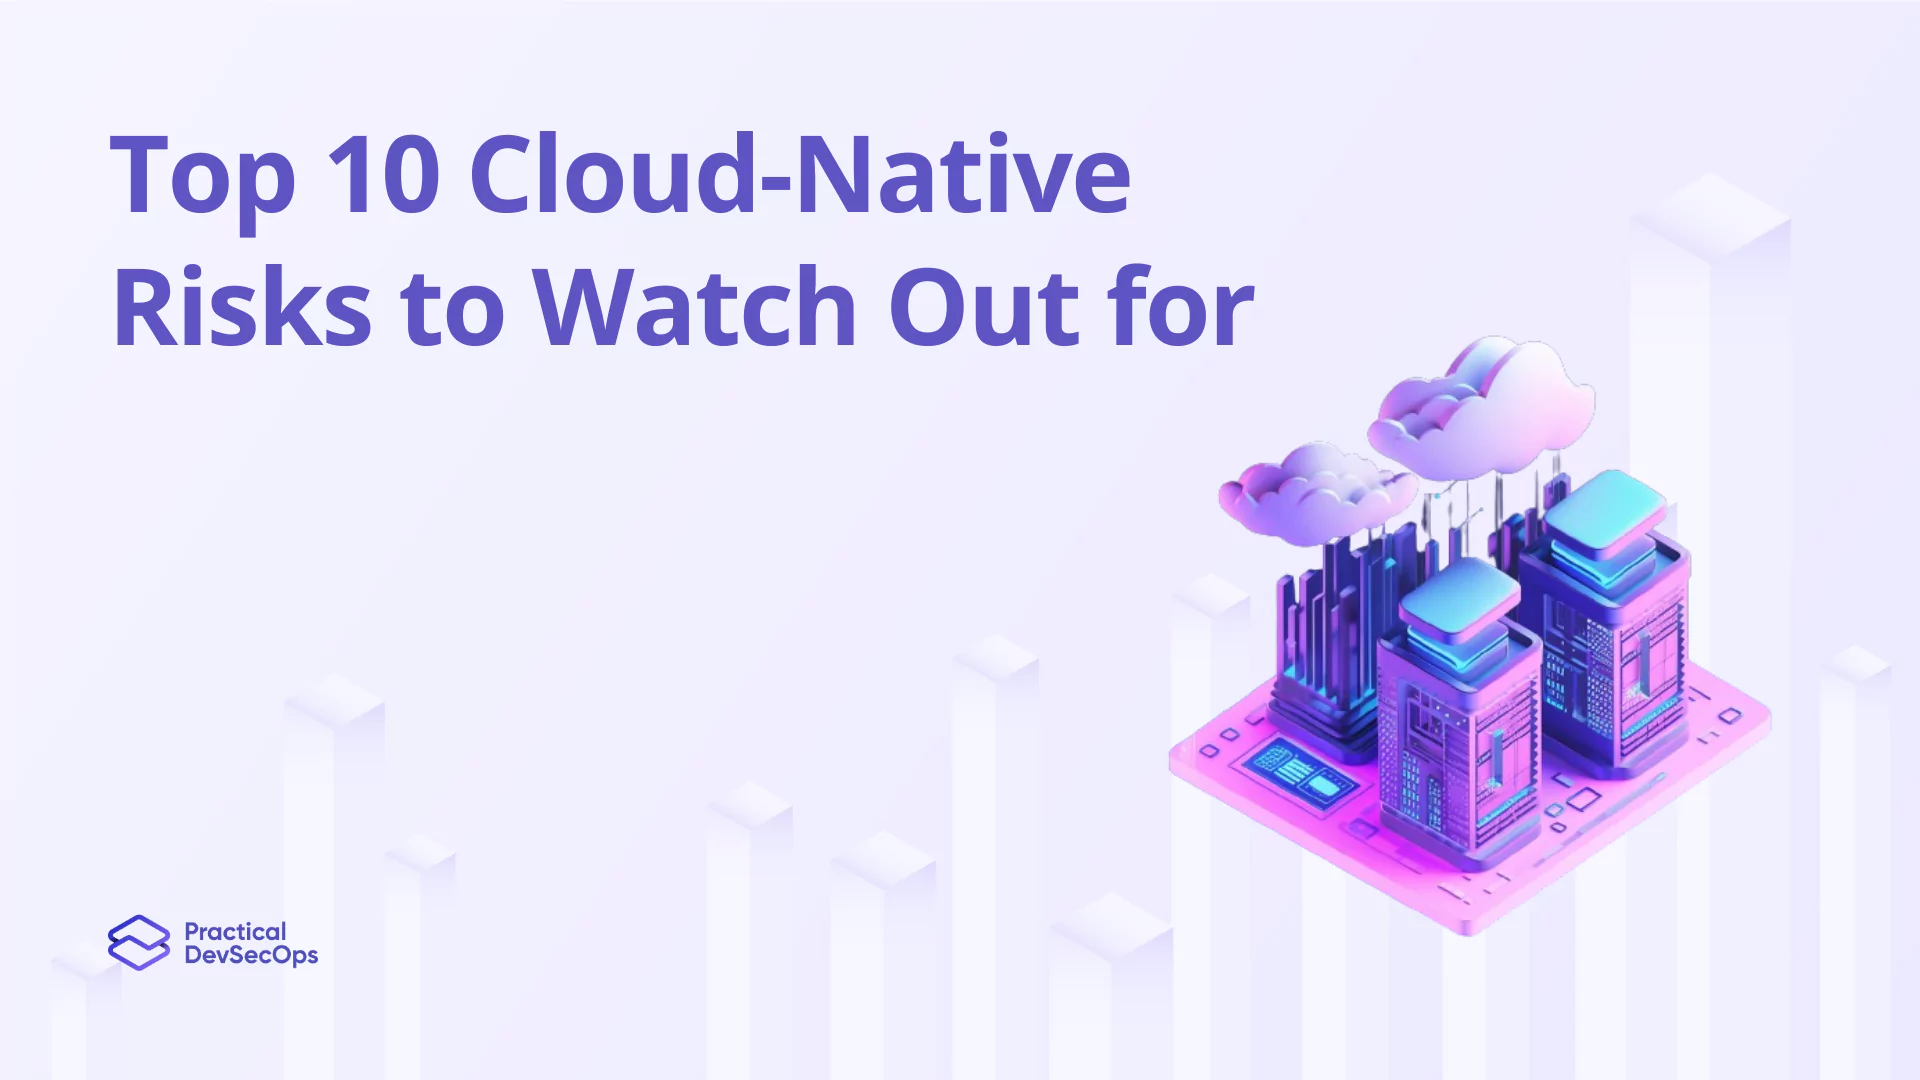 Top 10 Cloud-Native Risks to Watch Out for